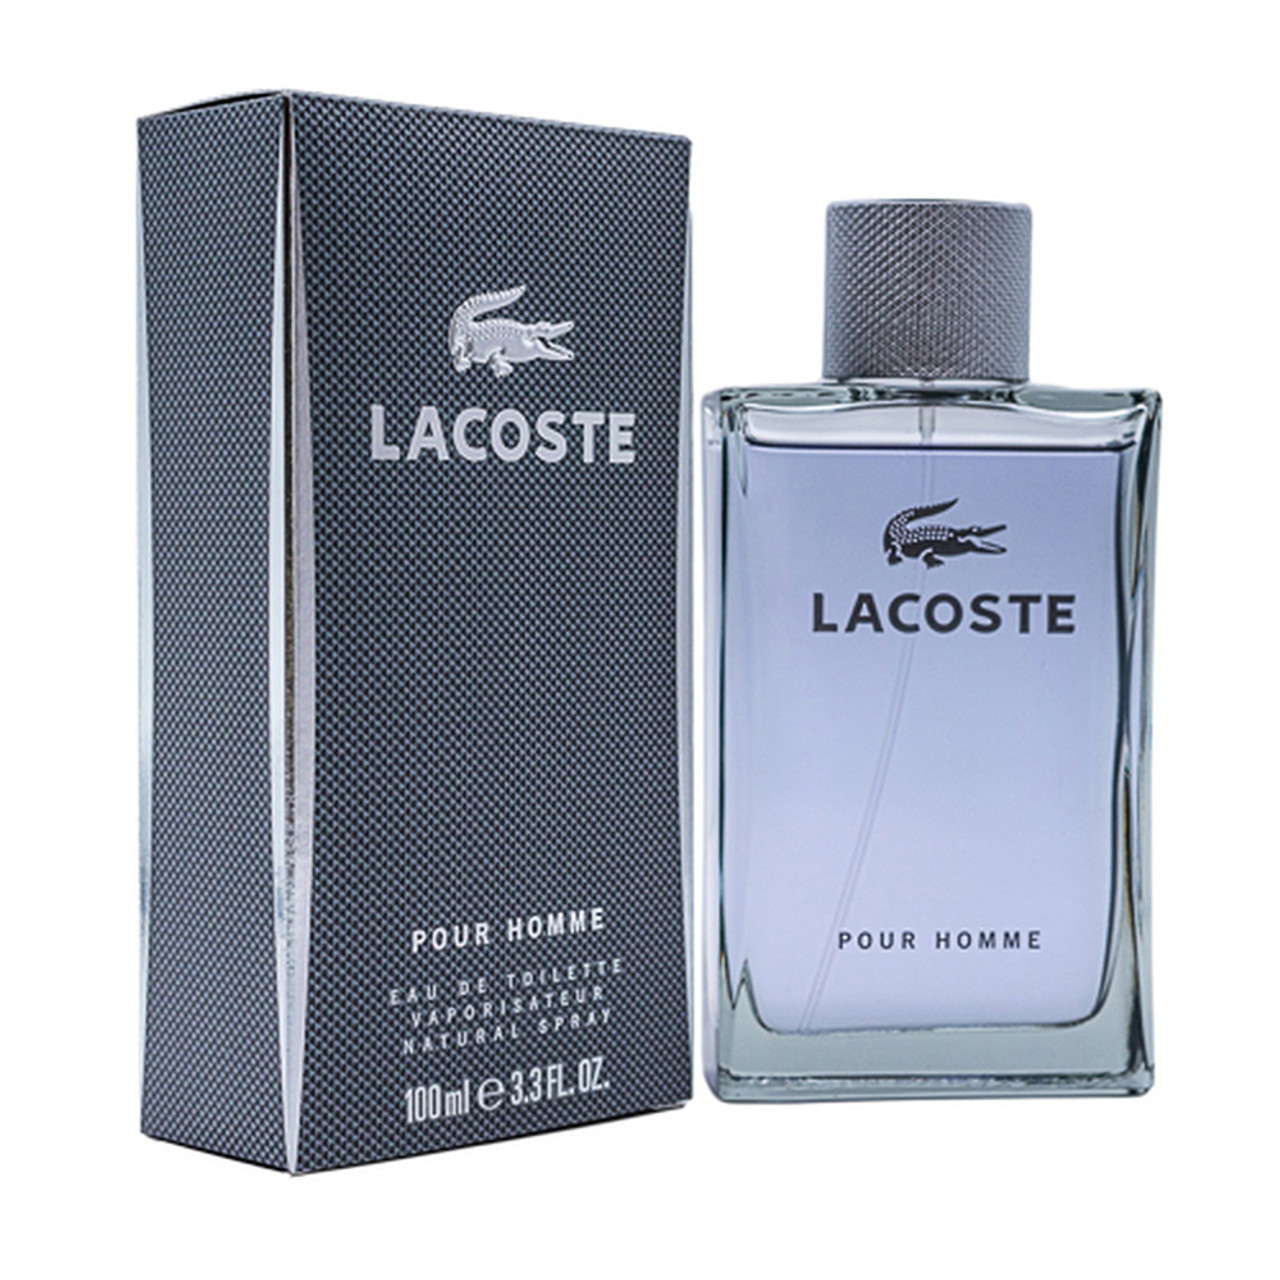 Lacoste Pour Homme by Lacoste EDT Spray for Men, 3.3 Oz